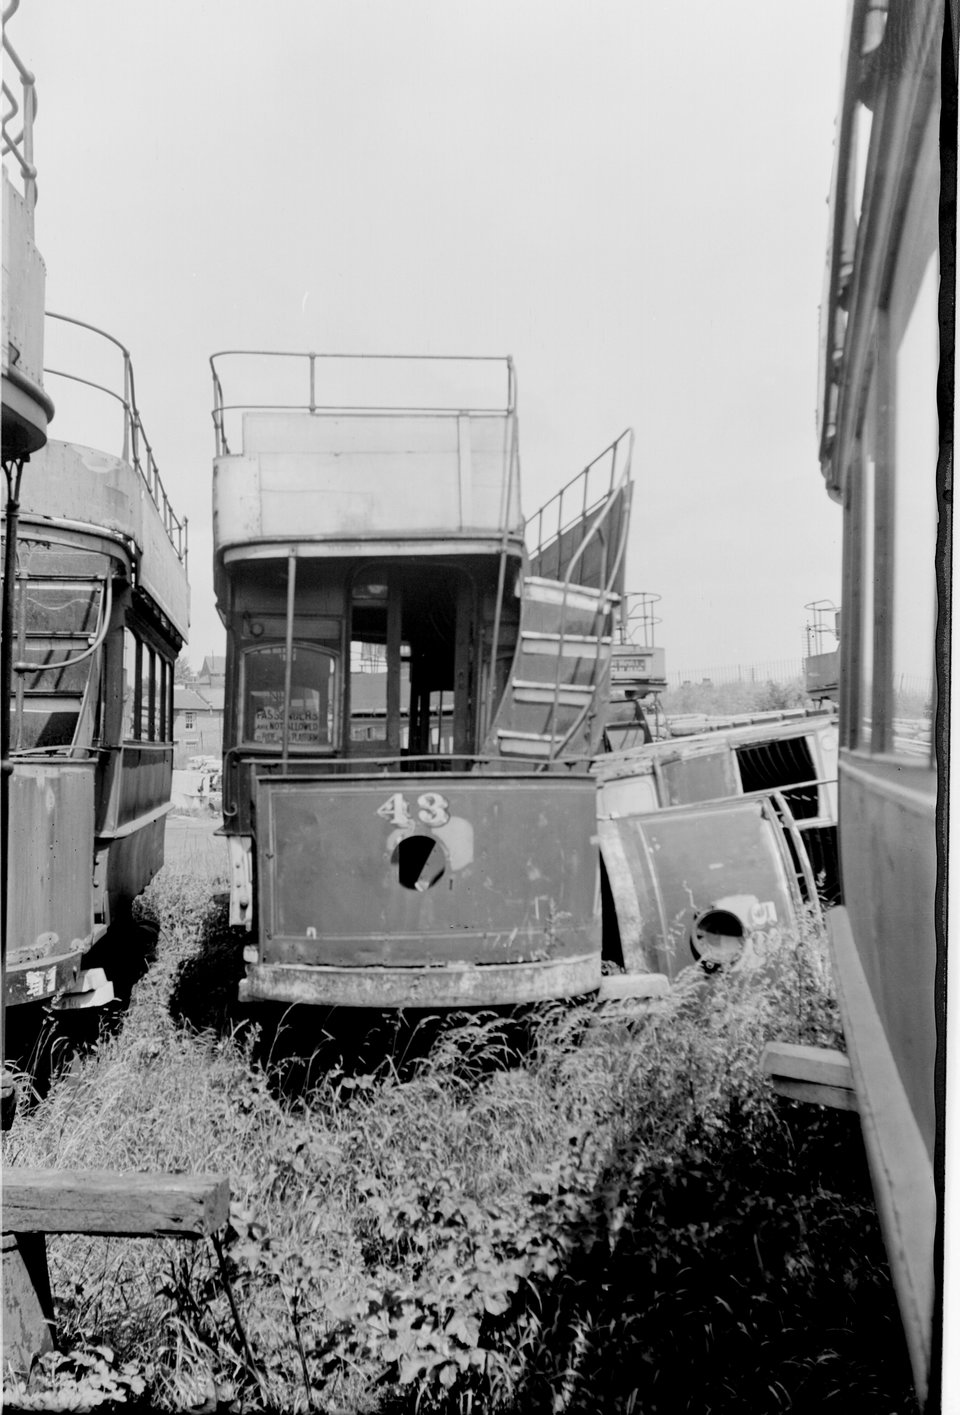 Sister car 43 in St Dennys scrap yard, Southampton; an all too common fate for most of Britain's remaining tramcars after the war. H.B. Priestley, 11/6/1949